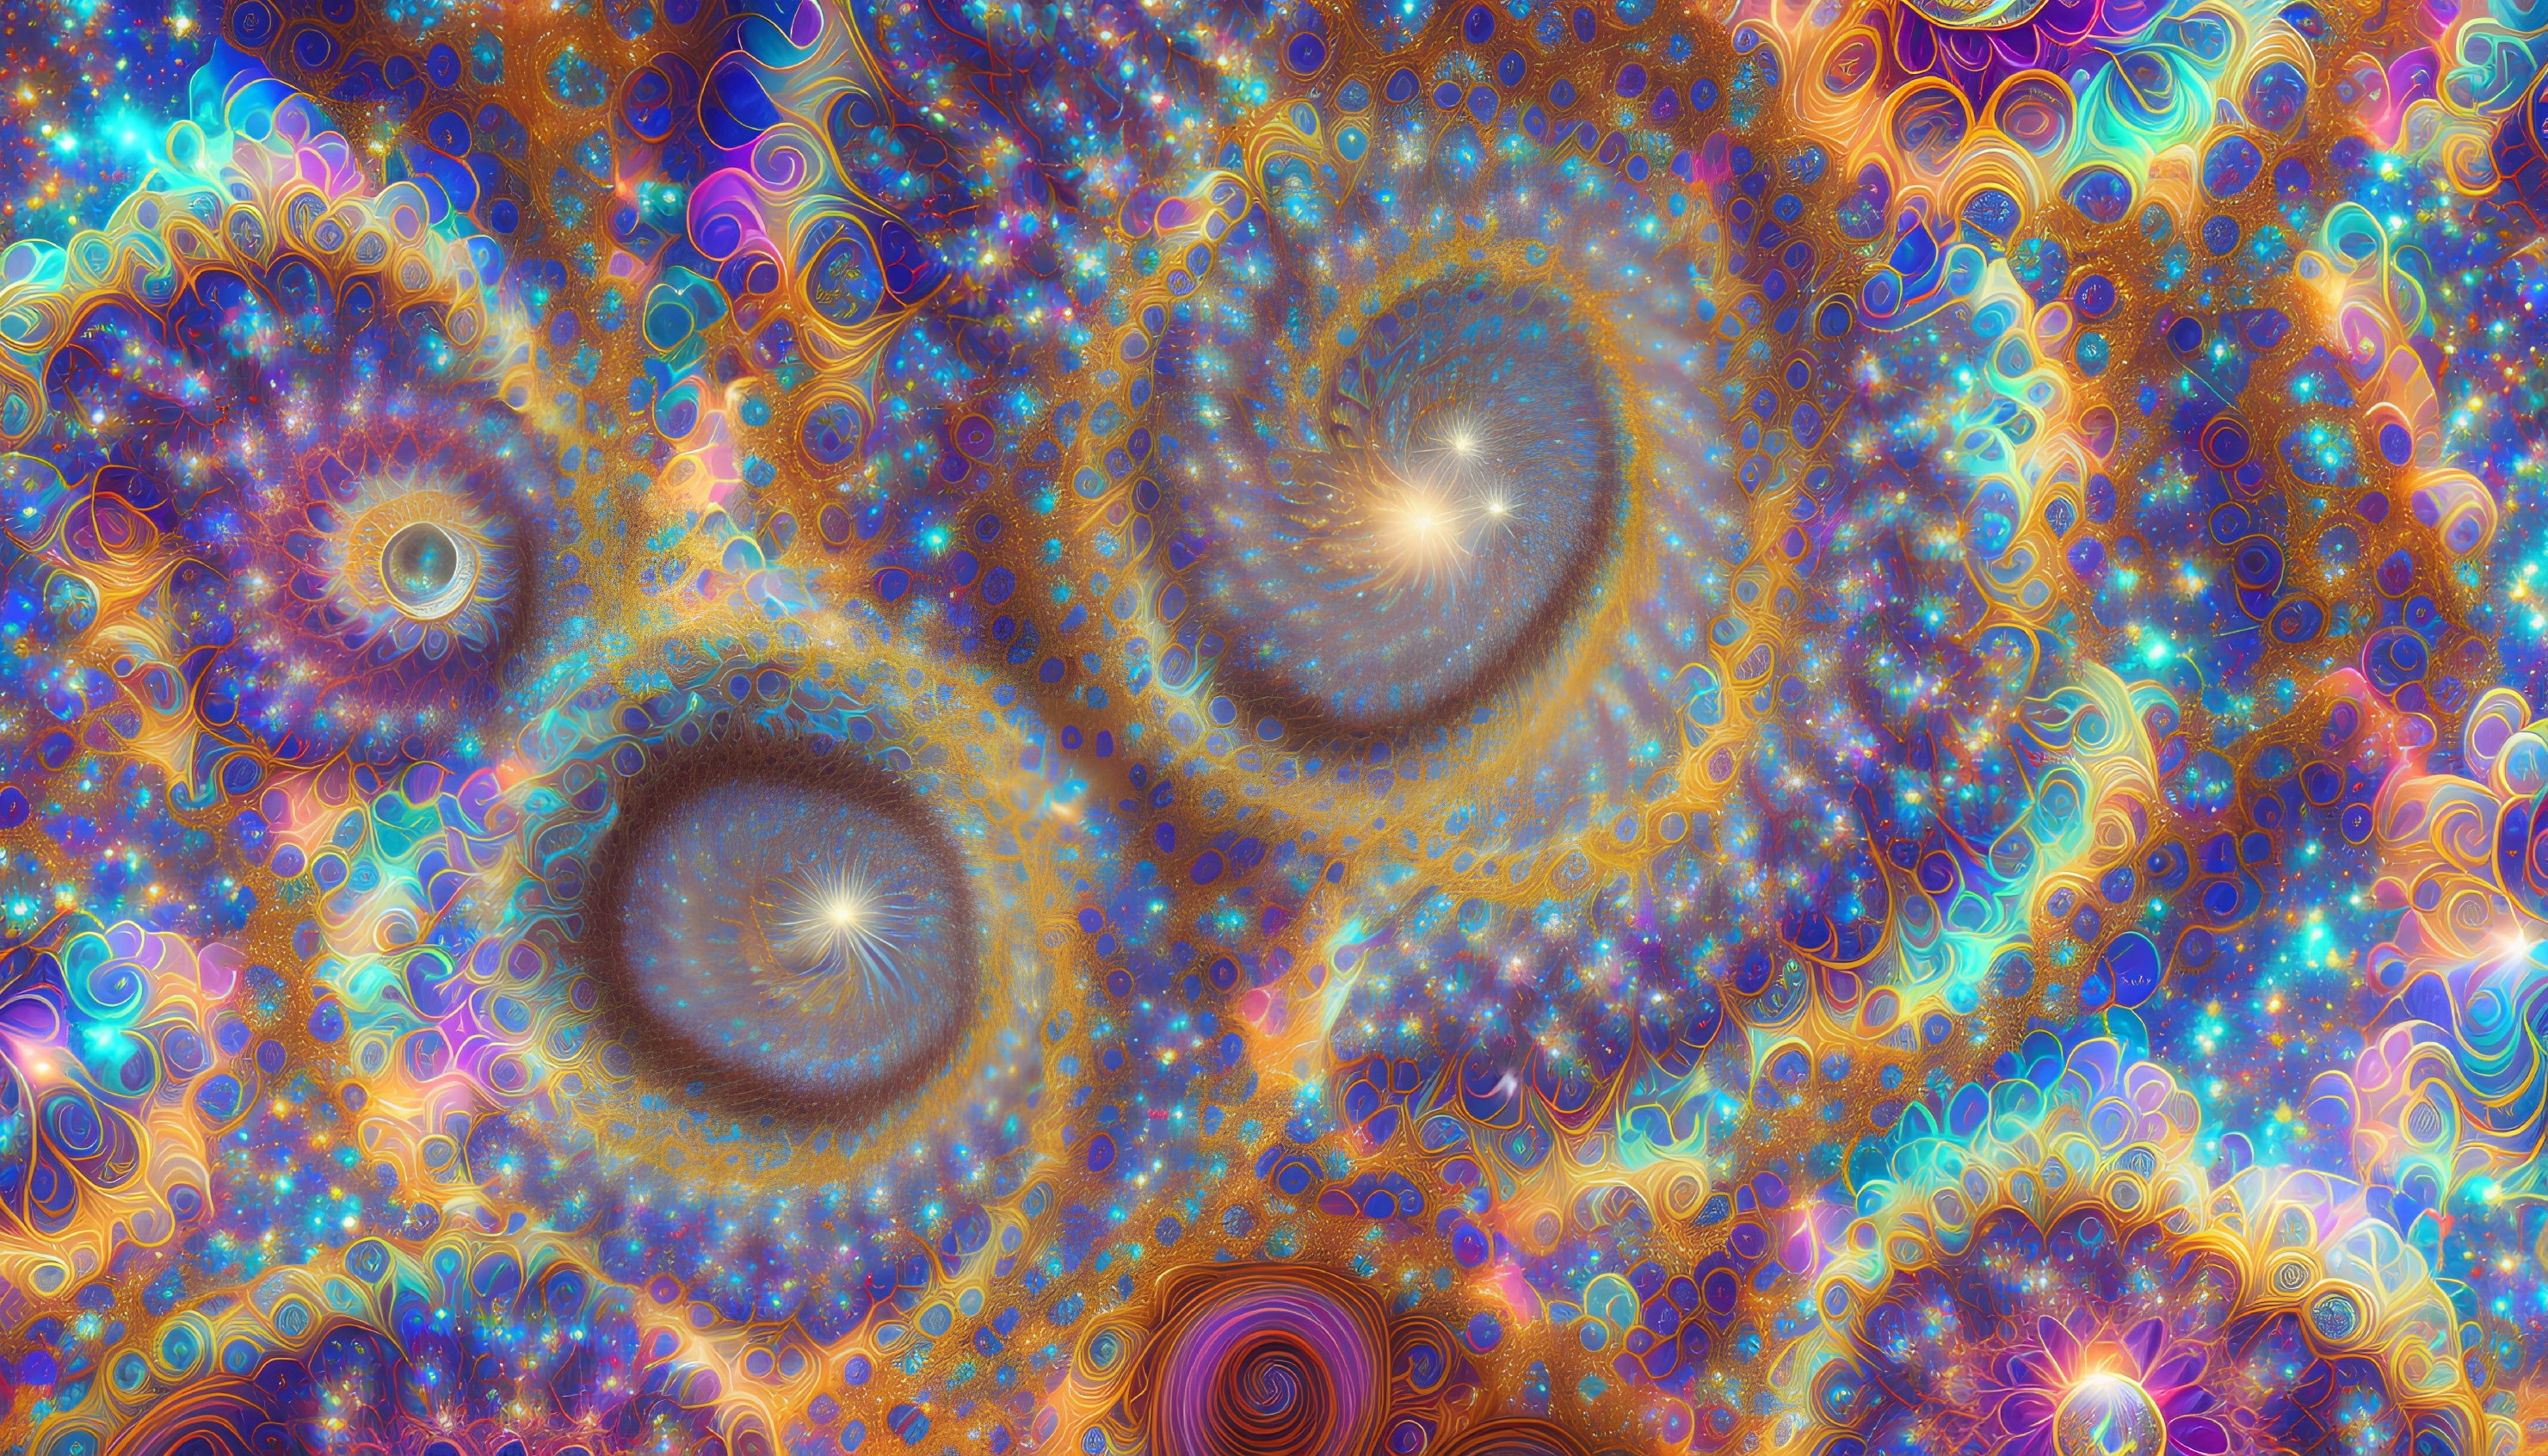 Colorful Fractal Image with Heart-like Shapes in Blue, Orange, Purple